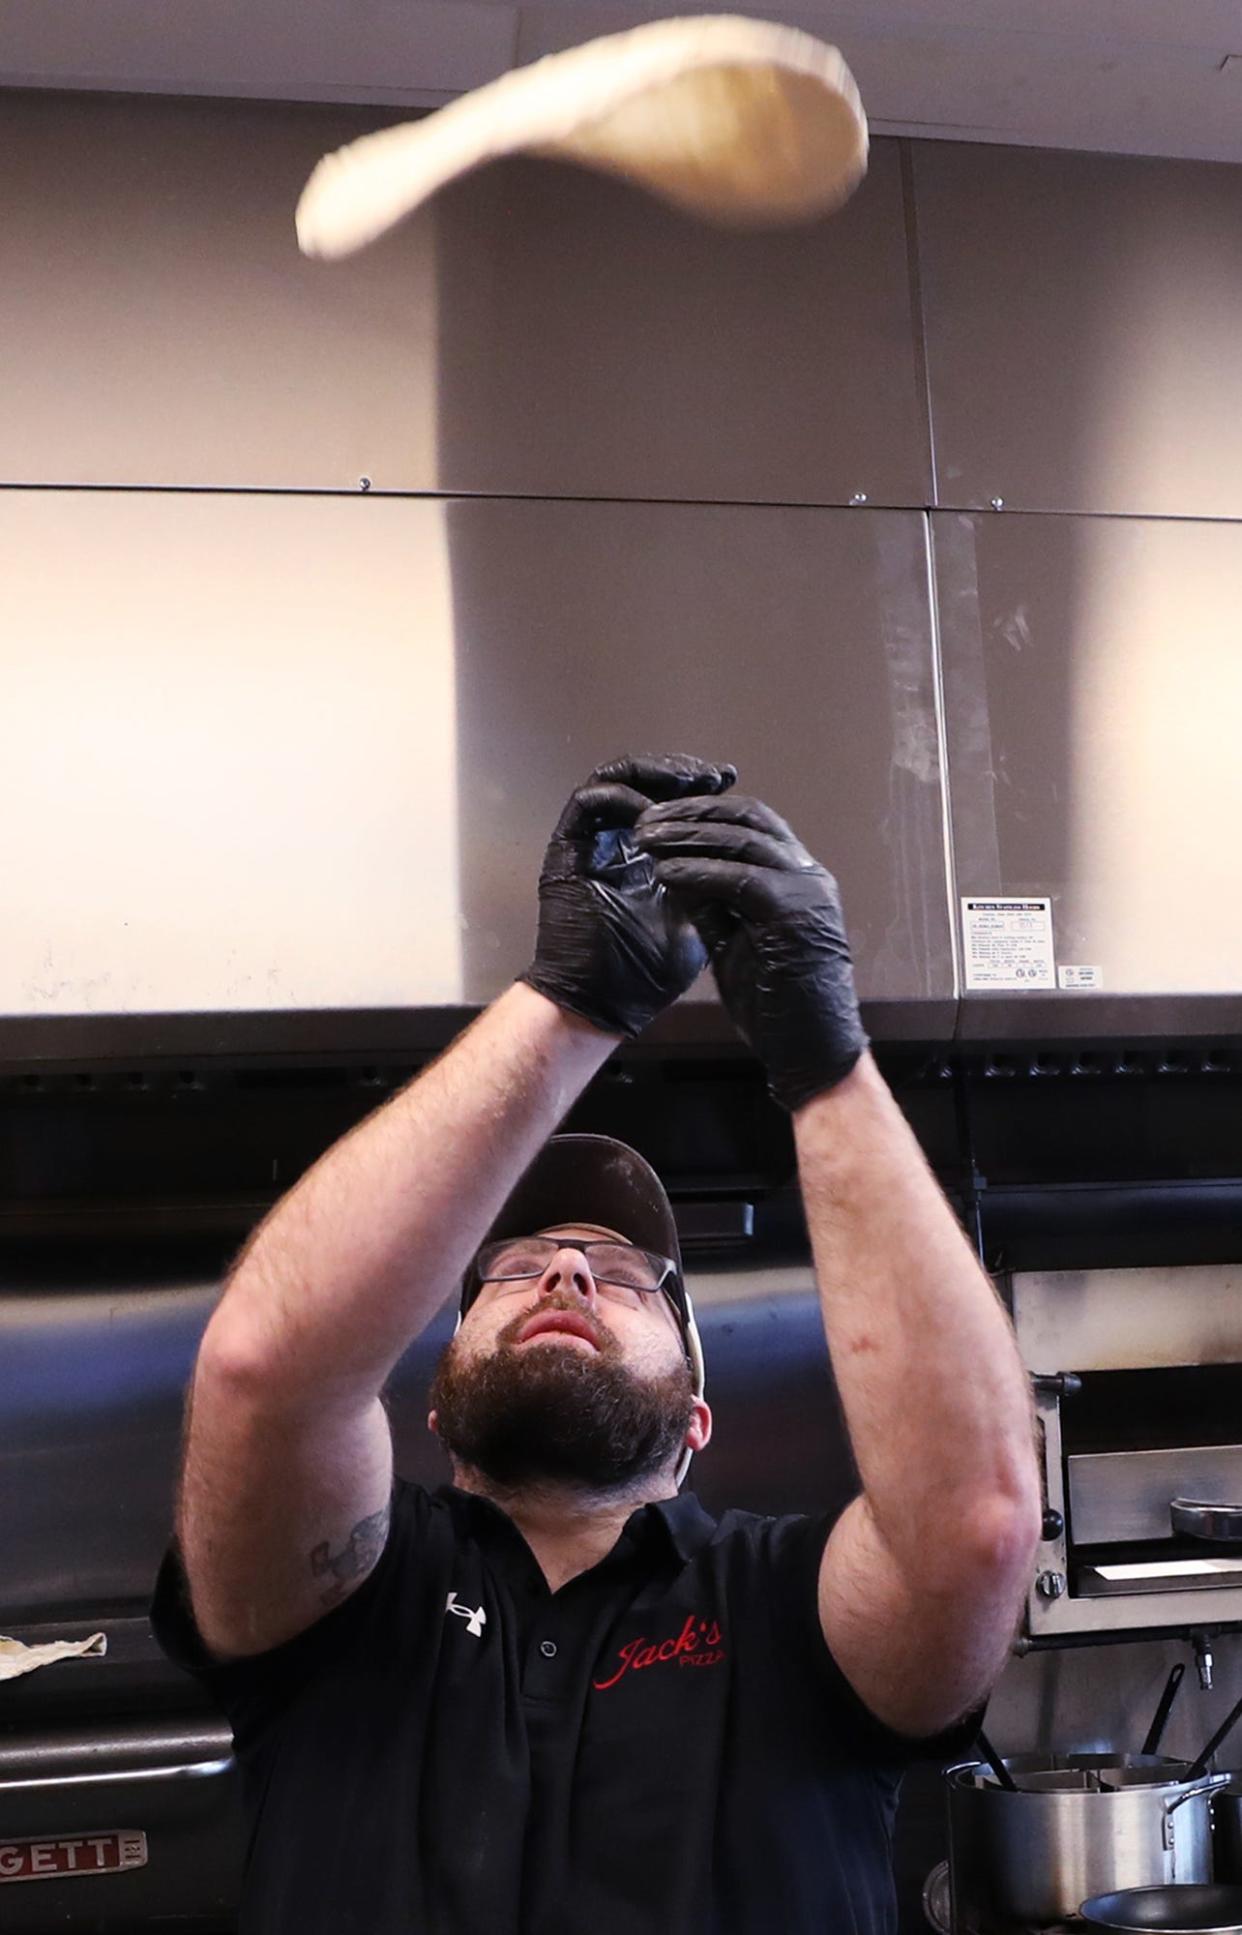 Cody Hornyak, owner of Jack's Pizza, hand tosses pizza dough in his in Brimfield Township eatery.